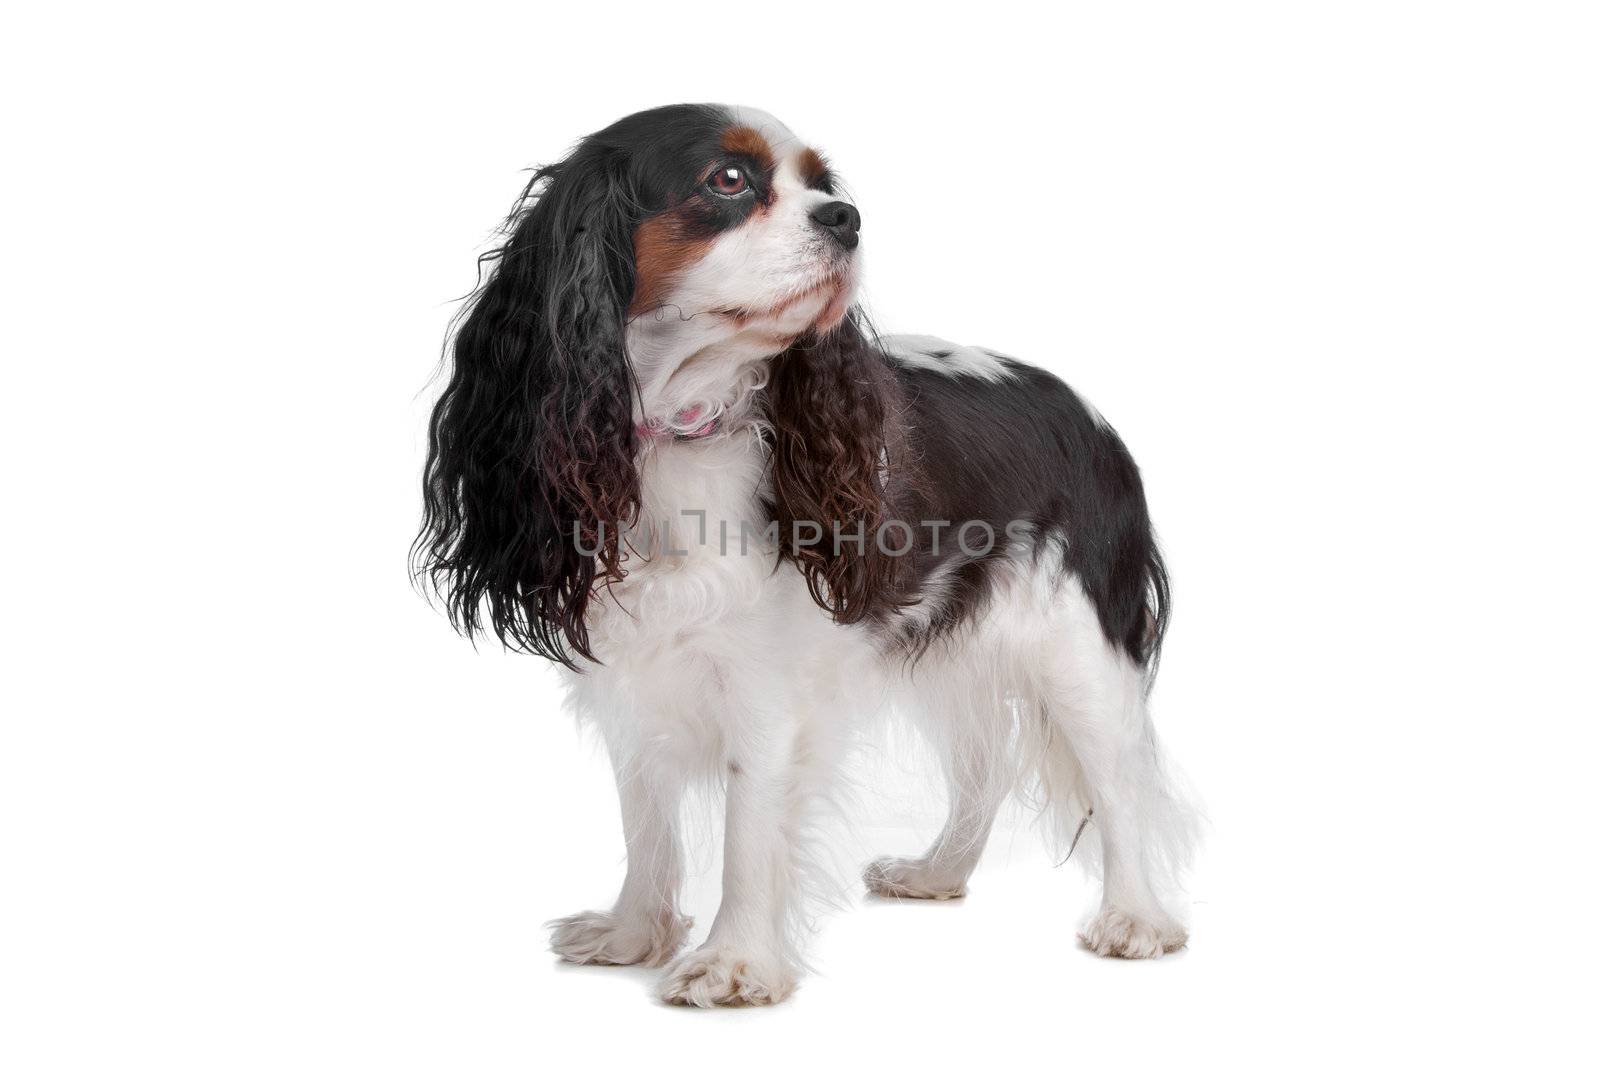 Cavalier king charles spaniel dog isolated on a white background